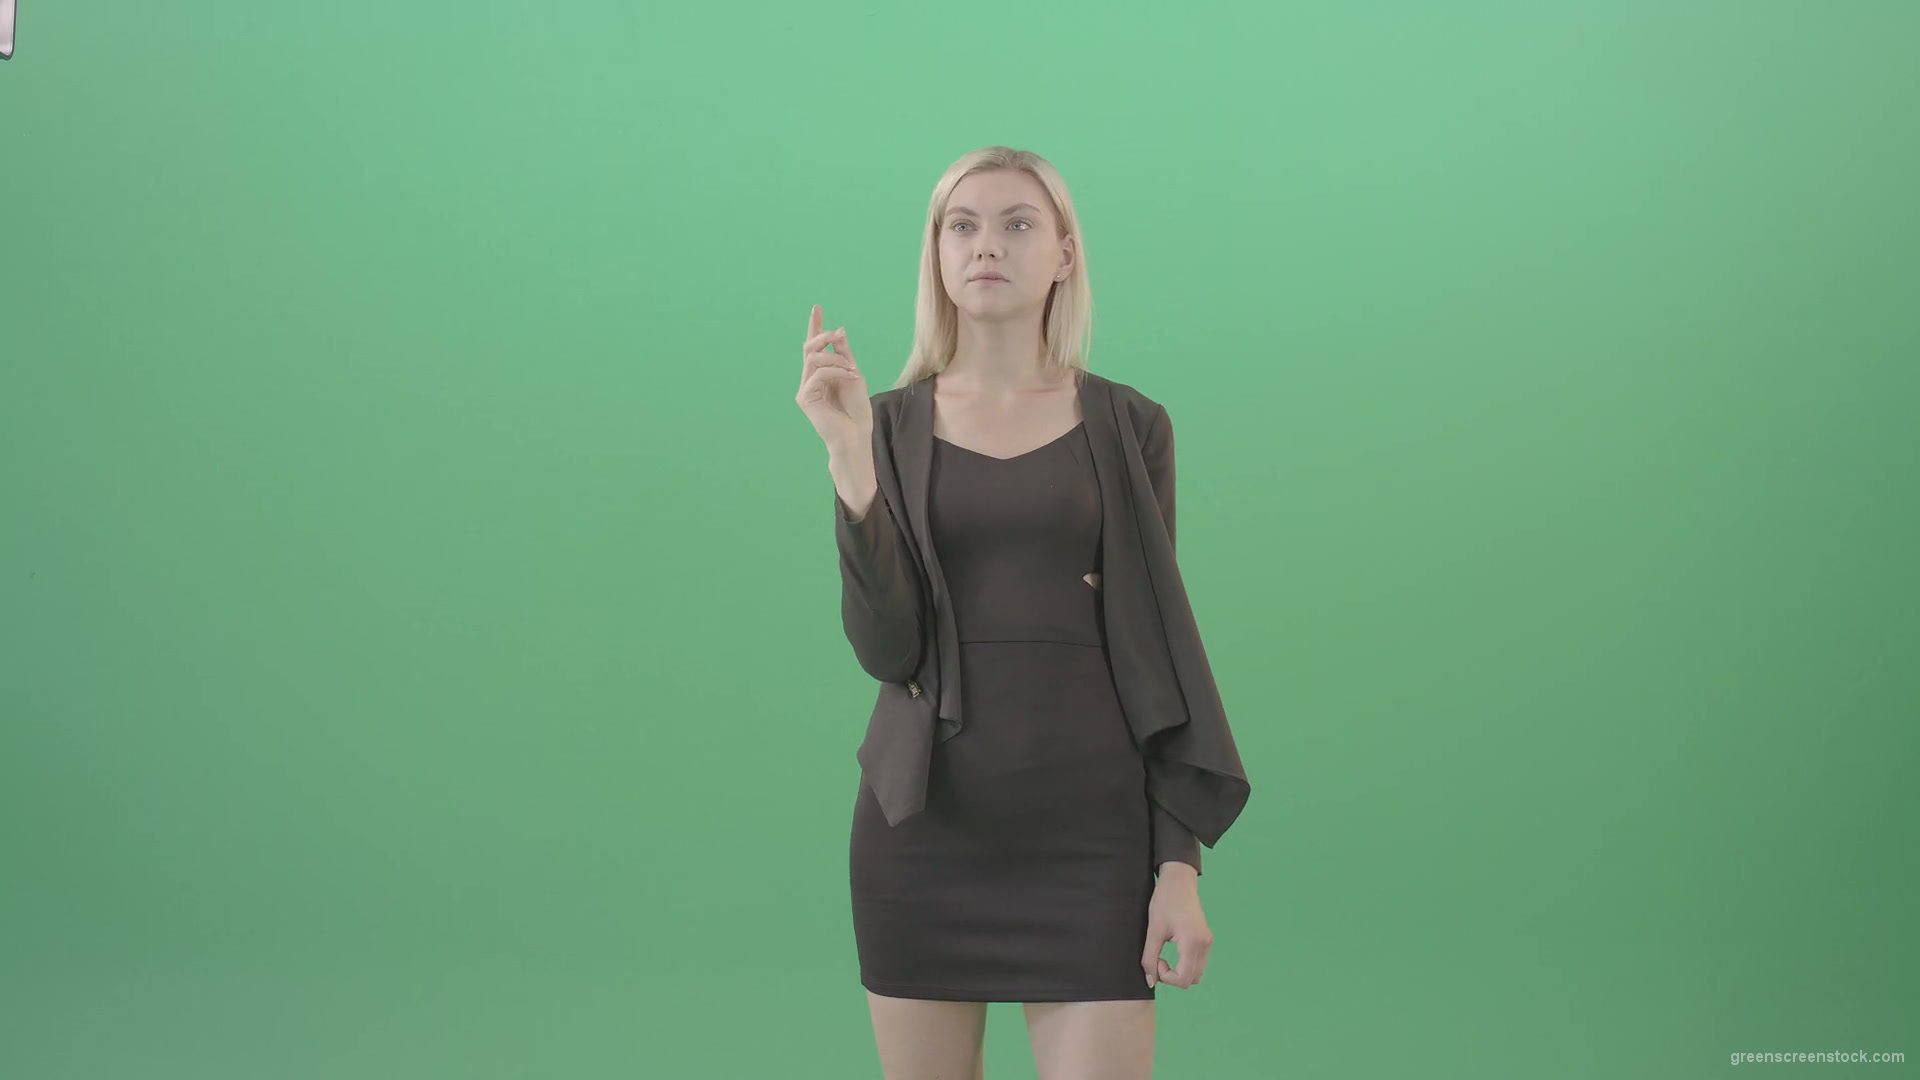 Blondie-shopping-in-virtual-store-on-touch-screen-in-green-screen-studio-4K-Video-Footage-1920_006 Green Screen Stock